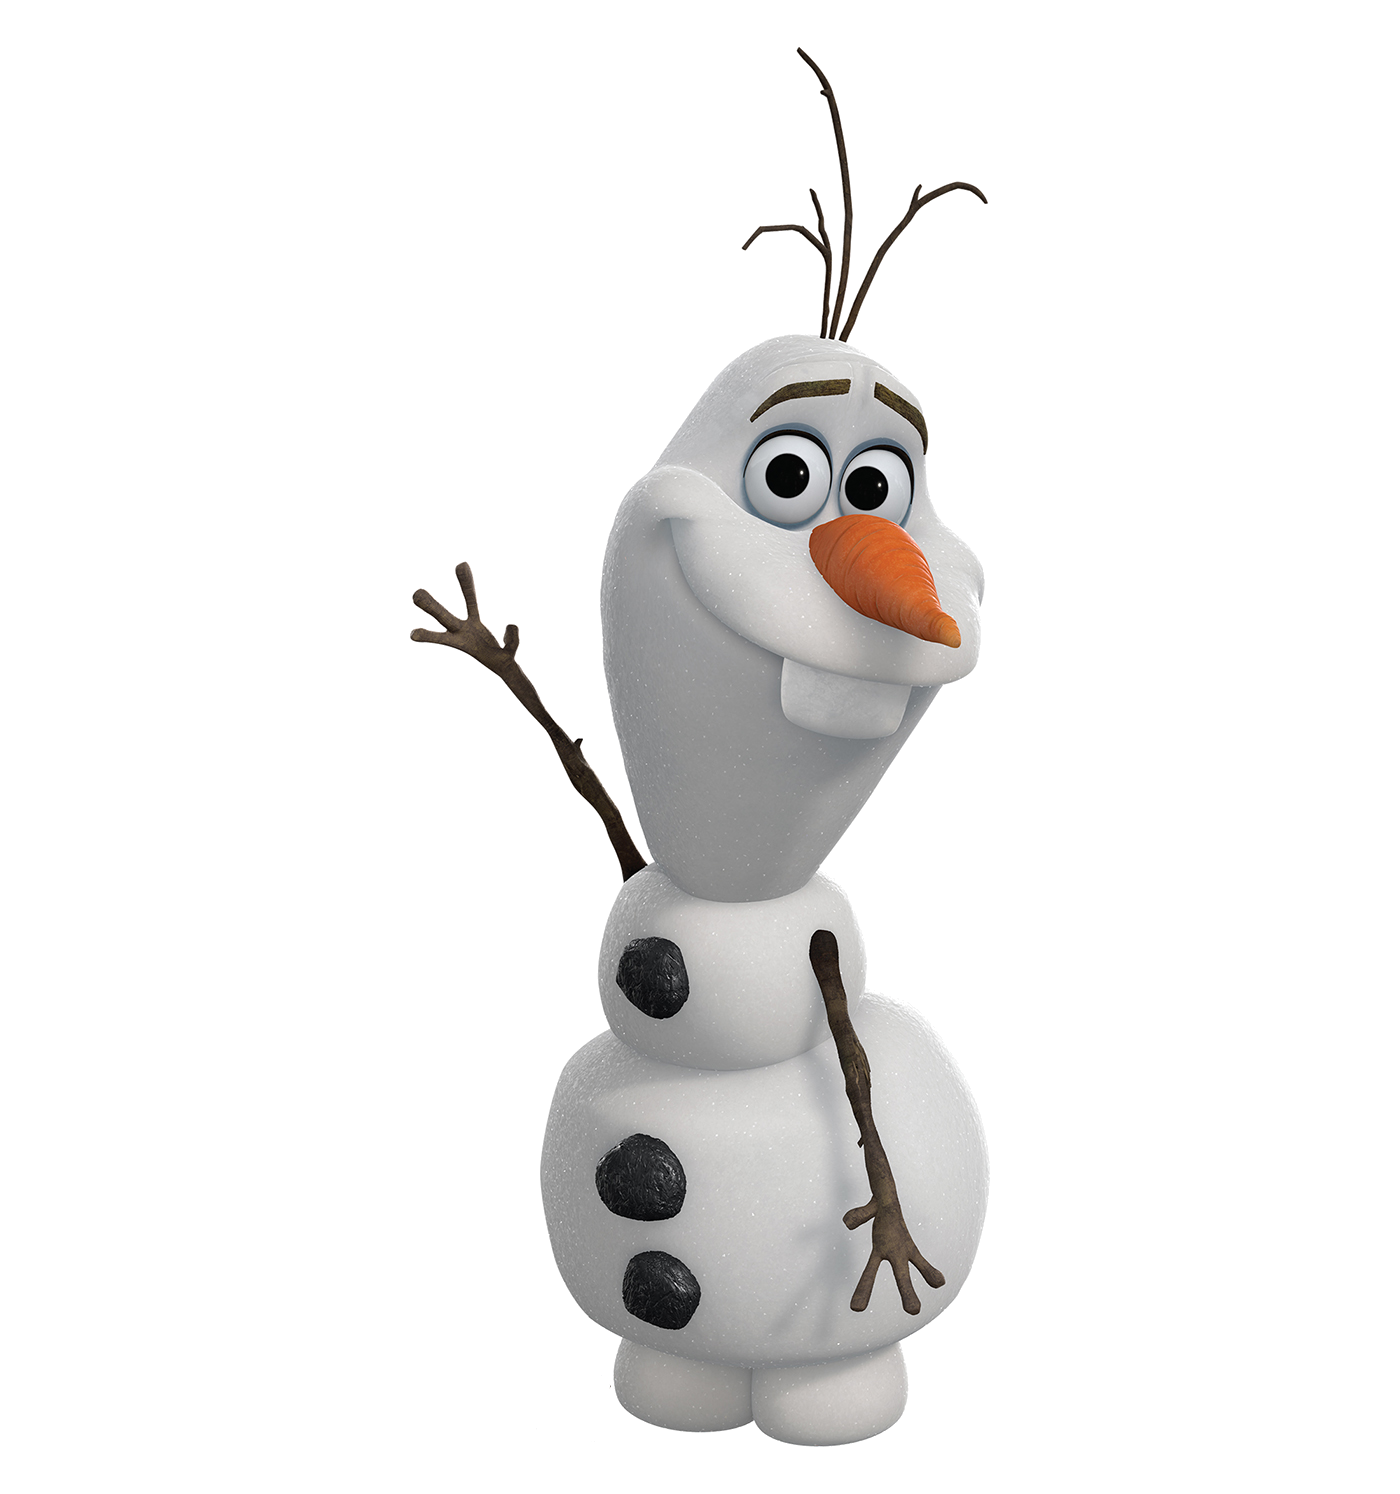 http://img1.wikia.nocookie.net/__cb20140323152843/disney/images/archive/9/94/20140323153250!Olaf_transparent.png